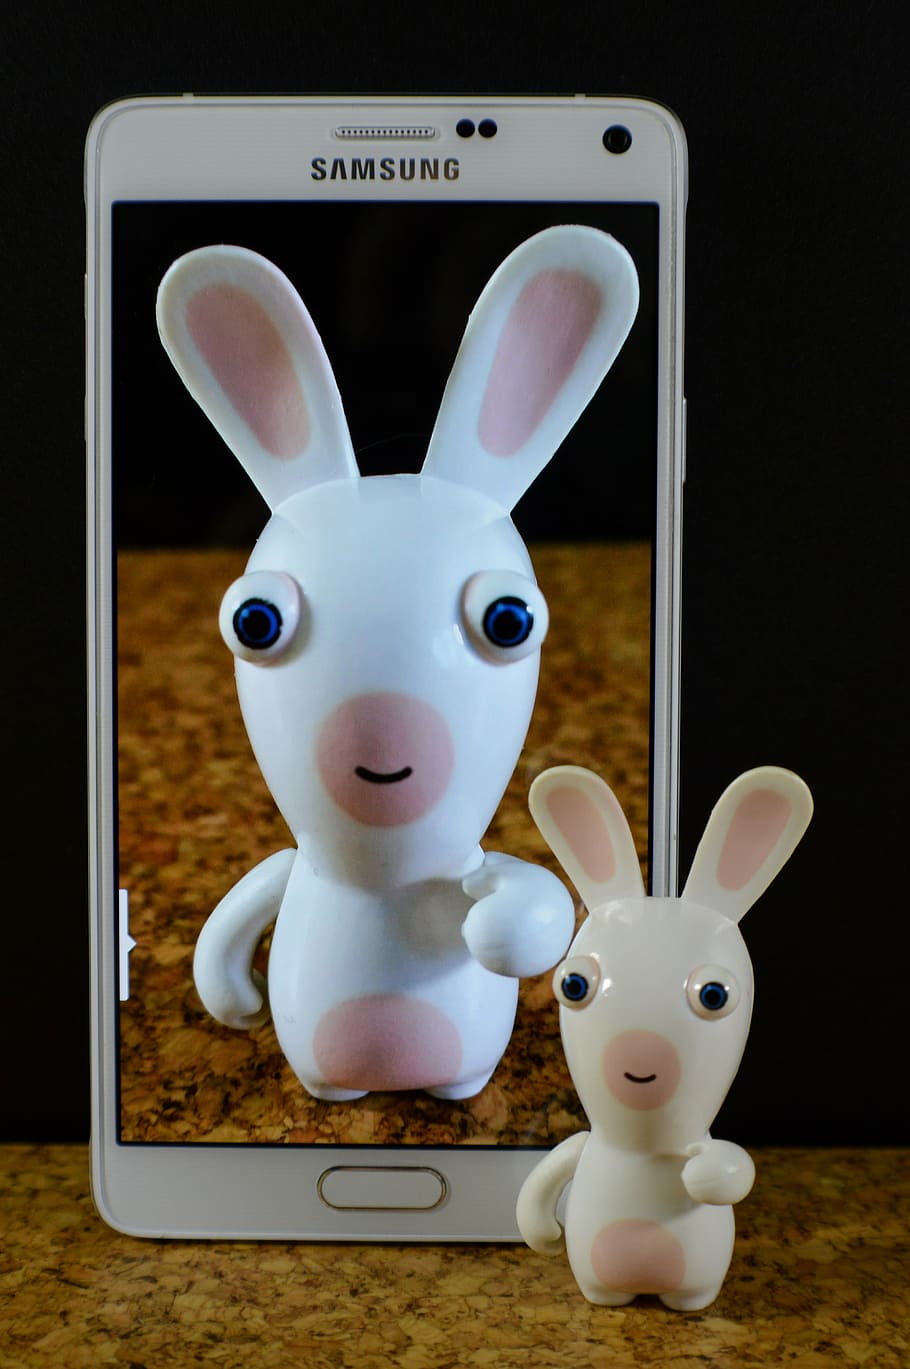 white, samsung android smartphone, figurine, brown, surface, hare, funny, smartphone, samsung, animal